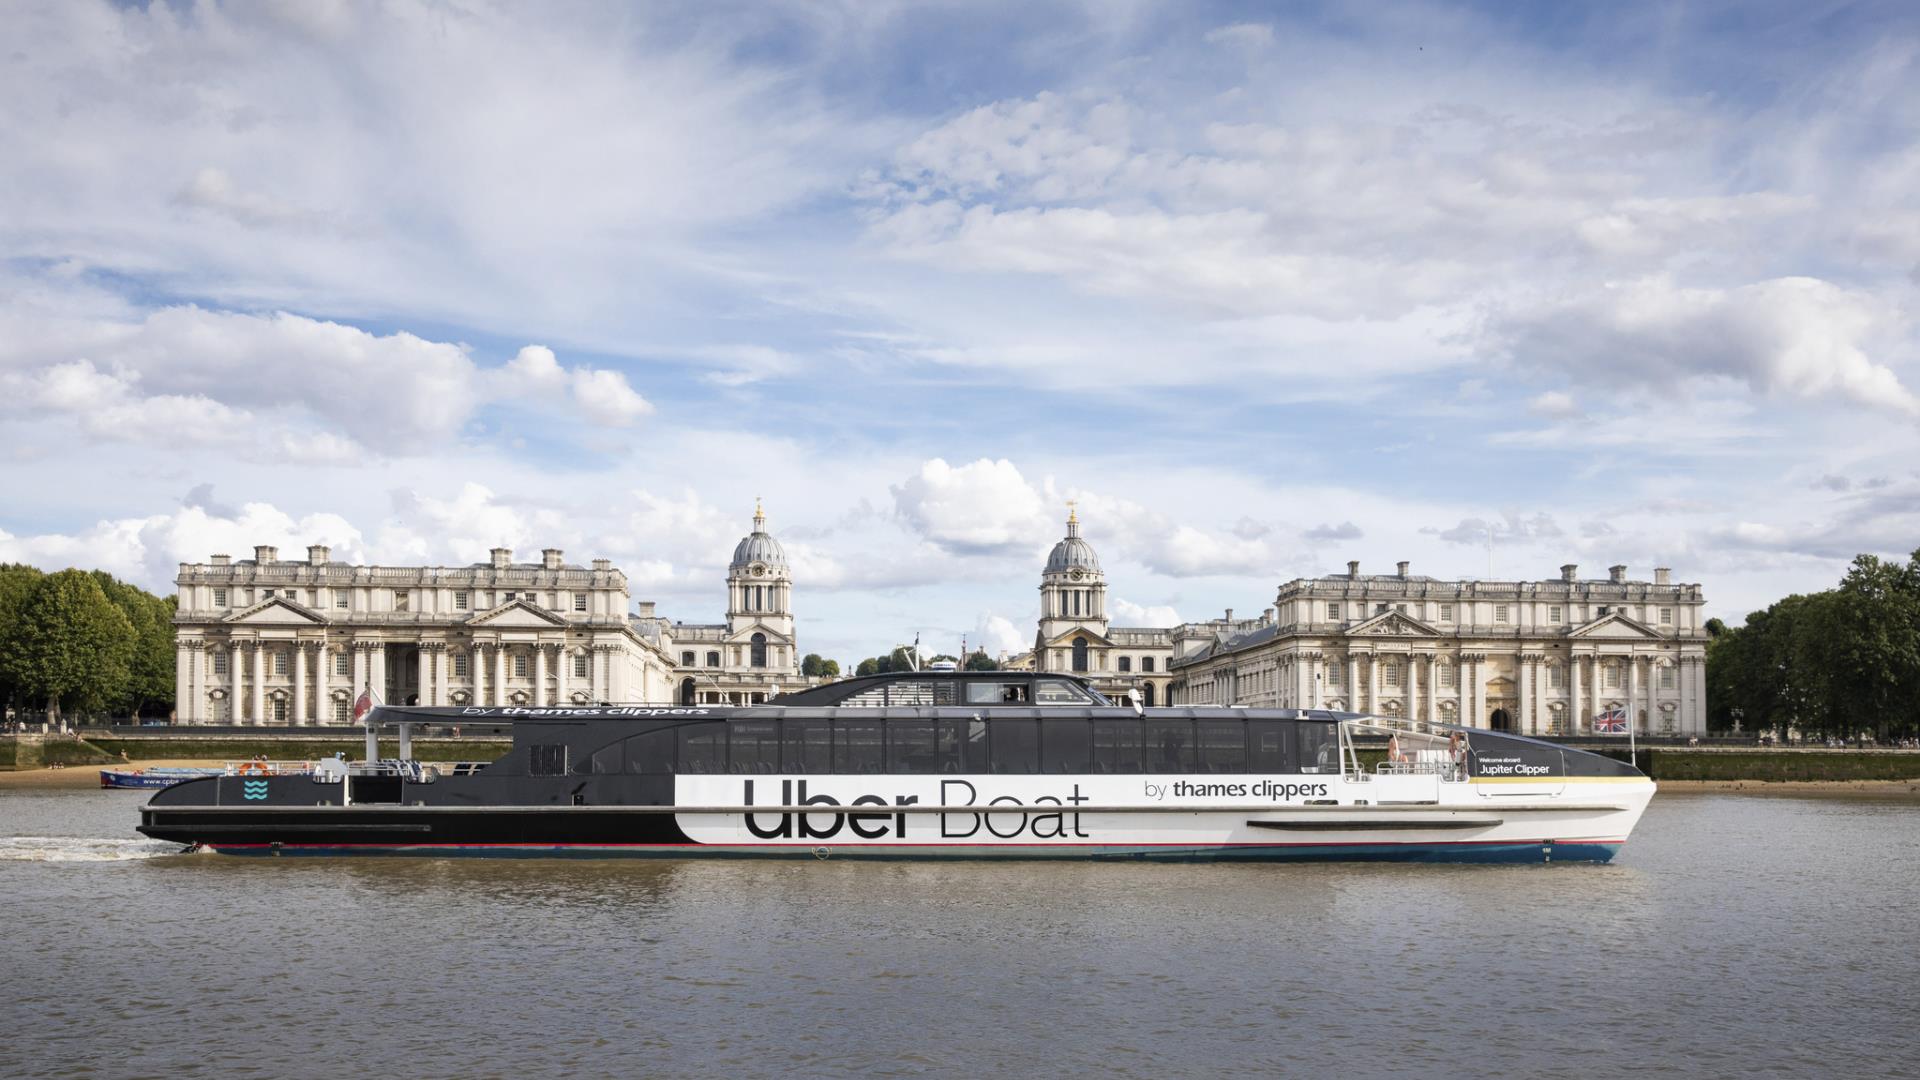 The Uber Boat by Thames Clippers as it passes the Old Royal Naval College on the river Thames.